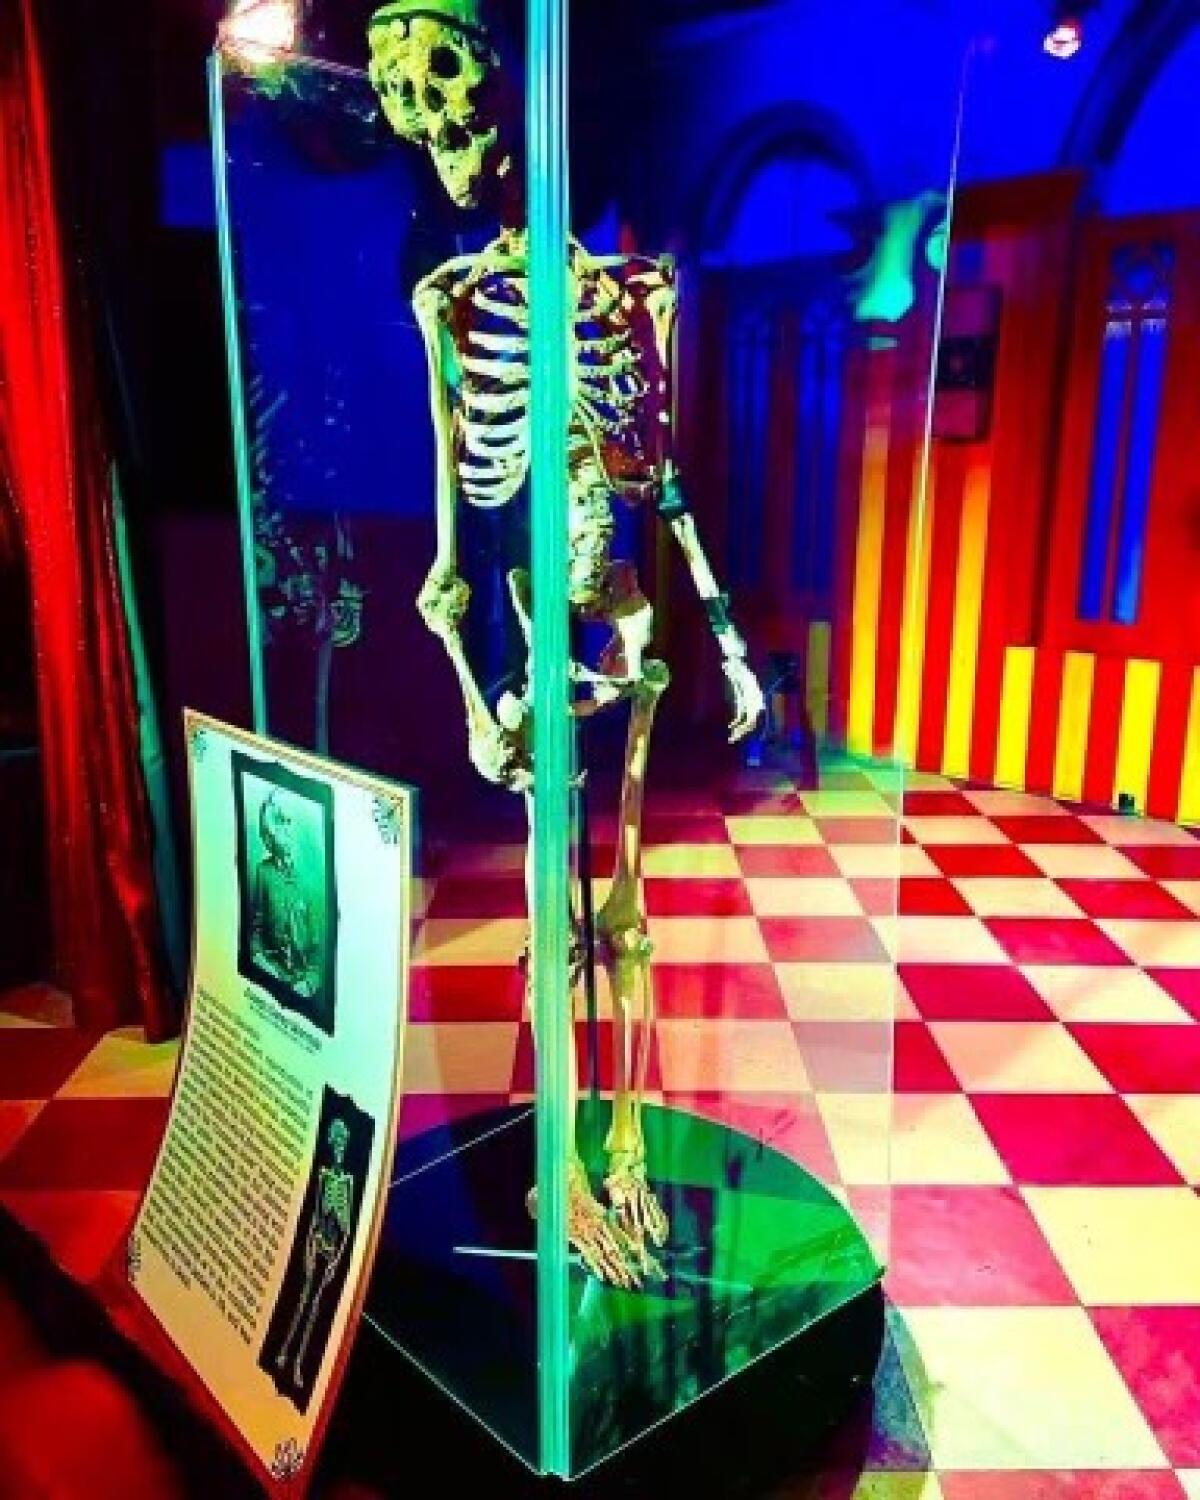 A skeleton on display at CIA.